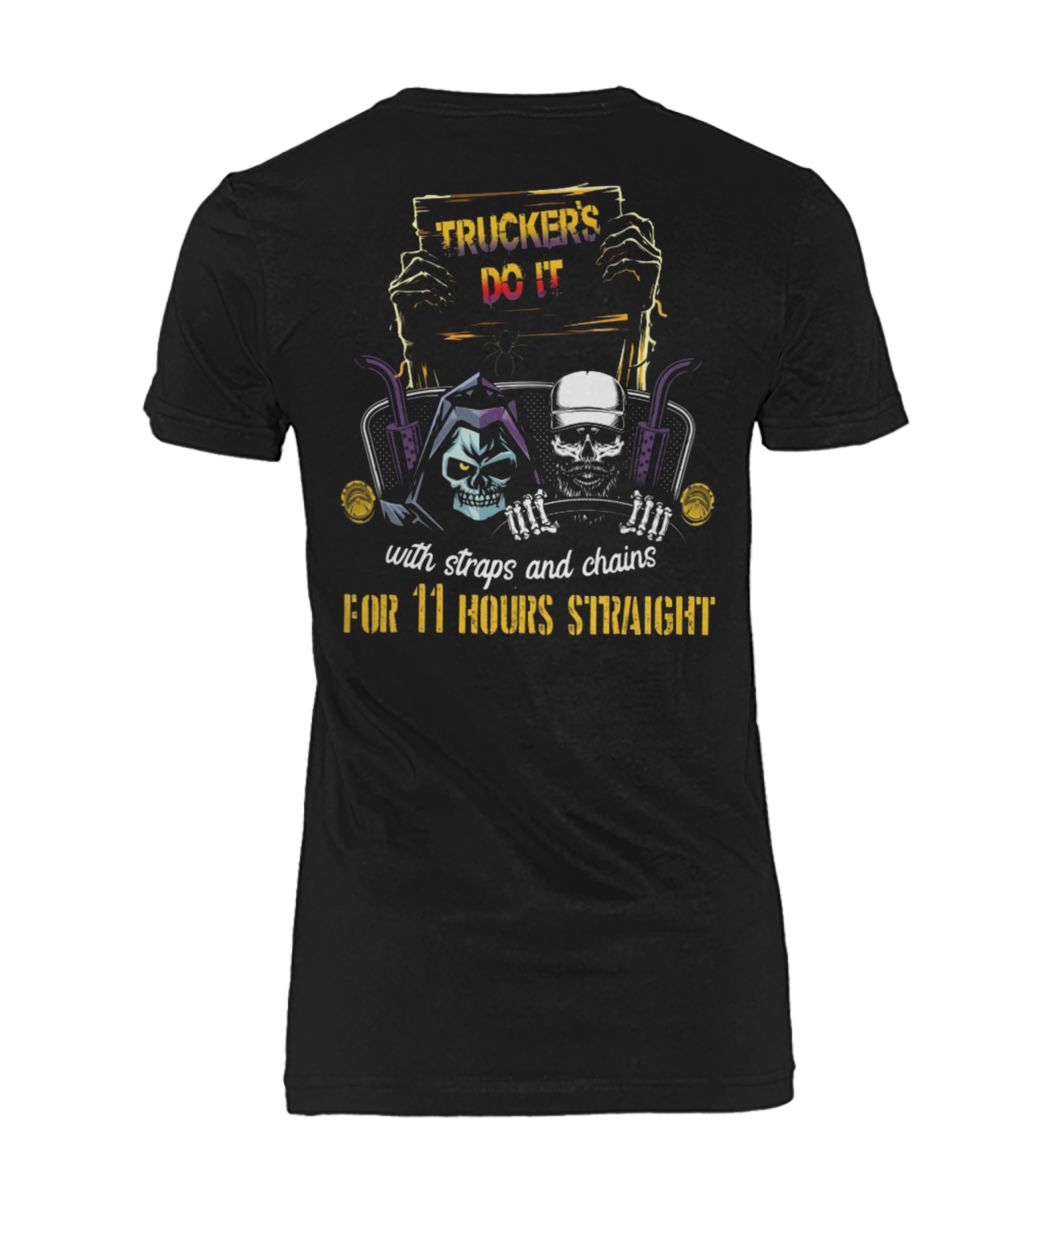 Trucker's do it with straps and chains for 11 hours straight skeleton women's crew tee